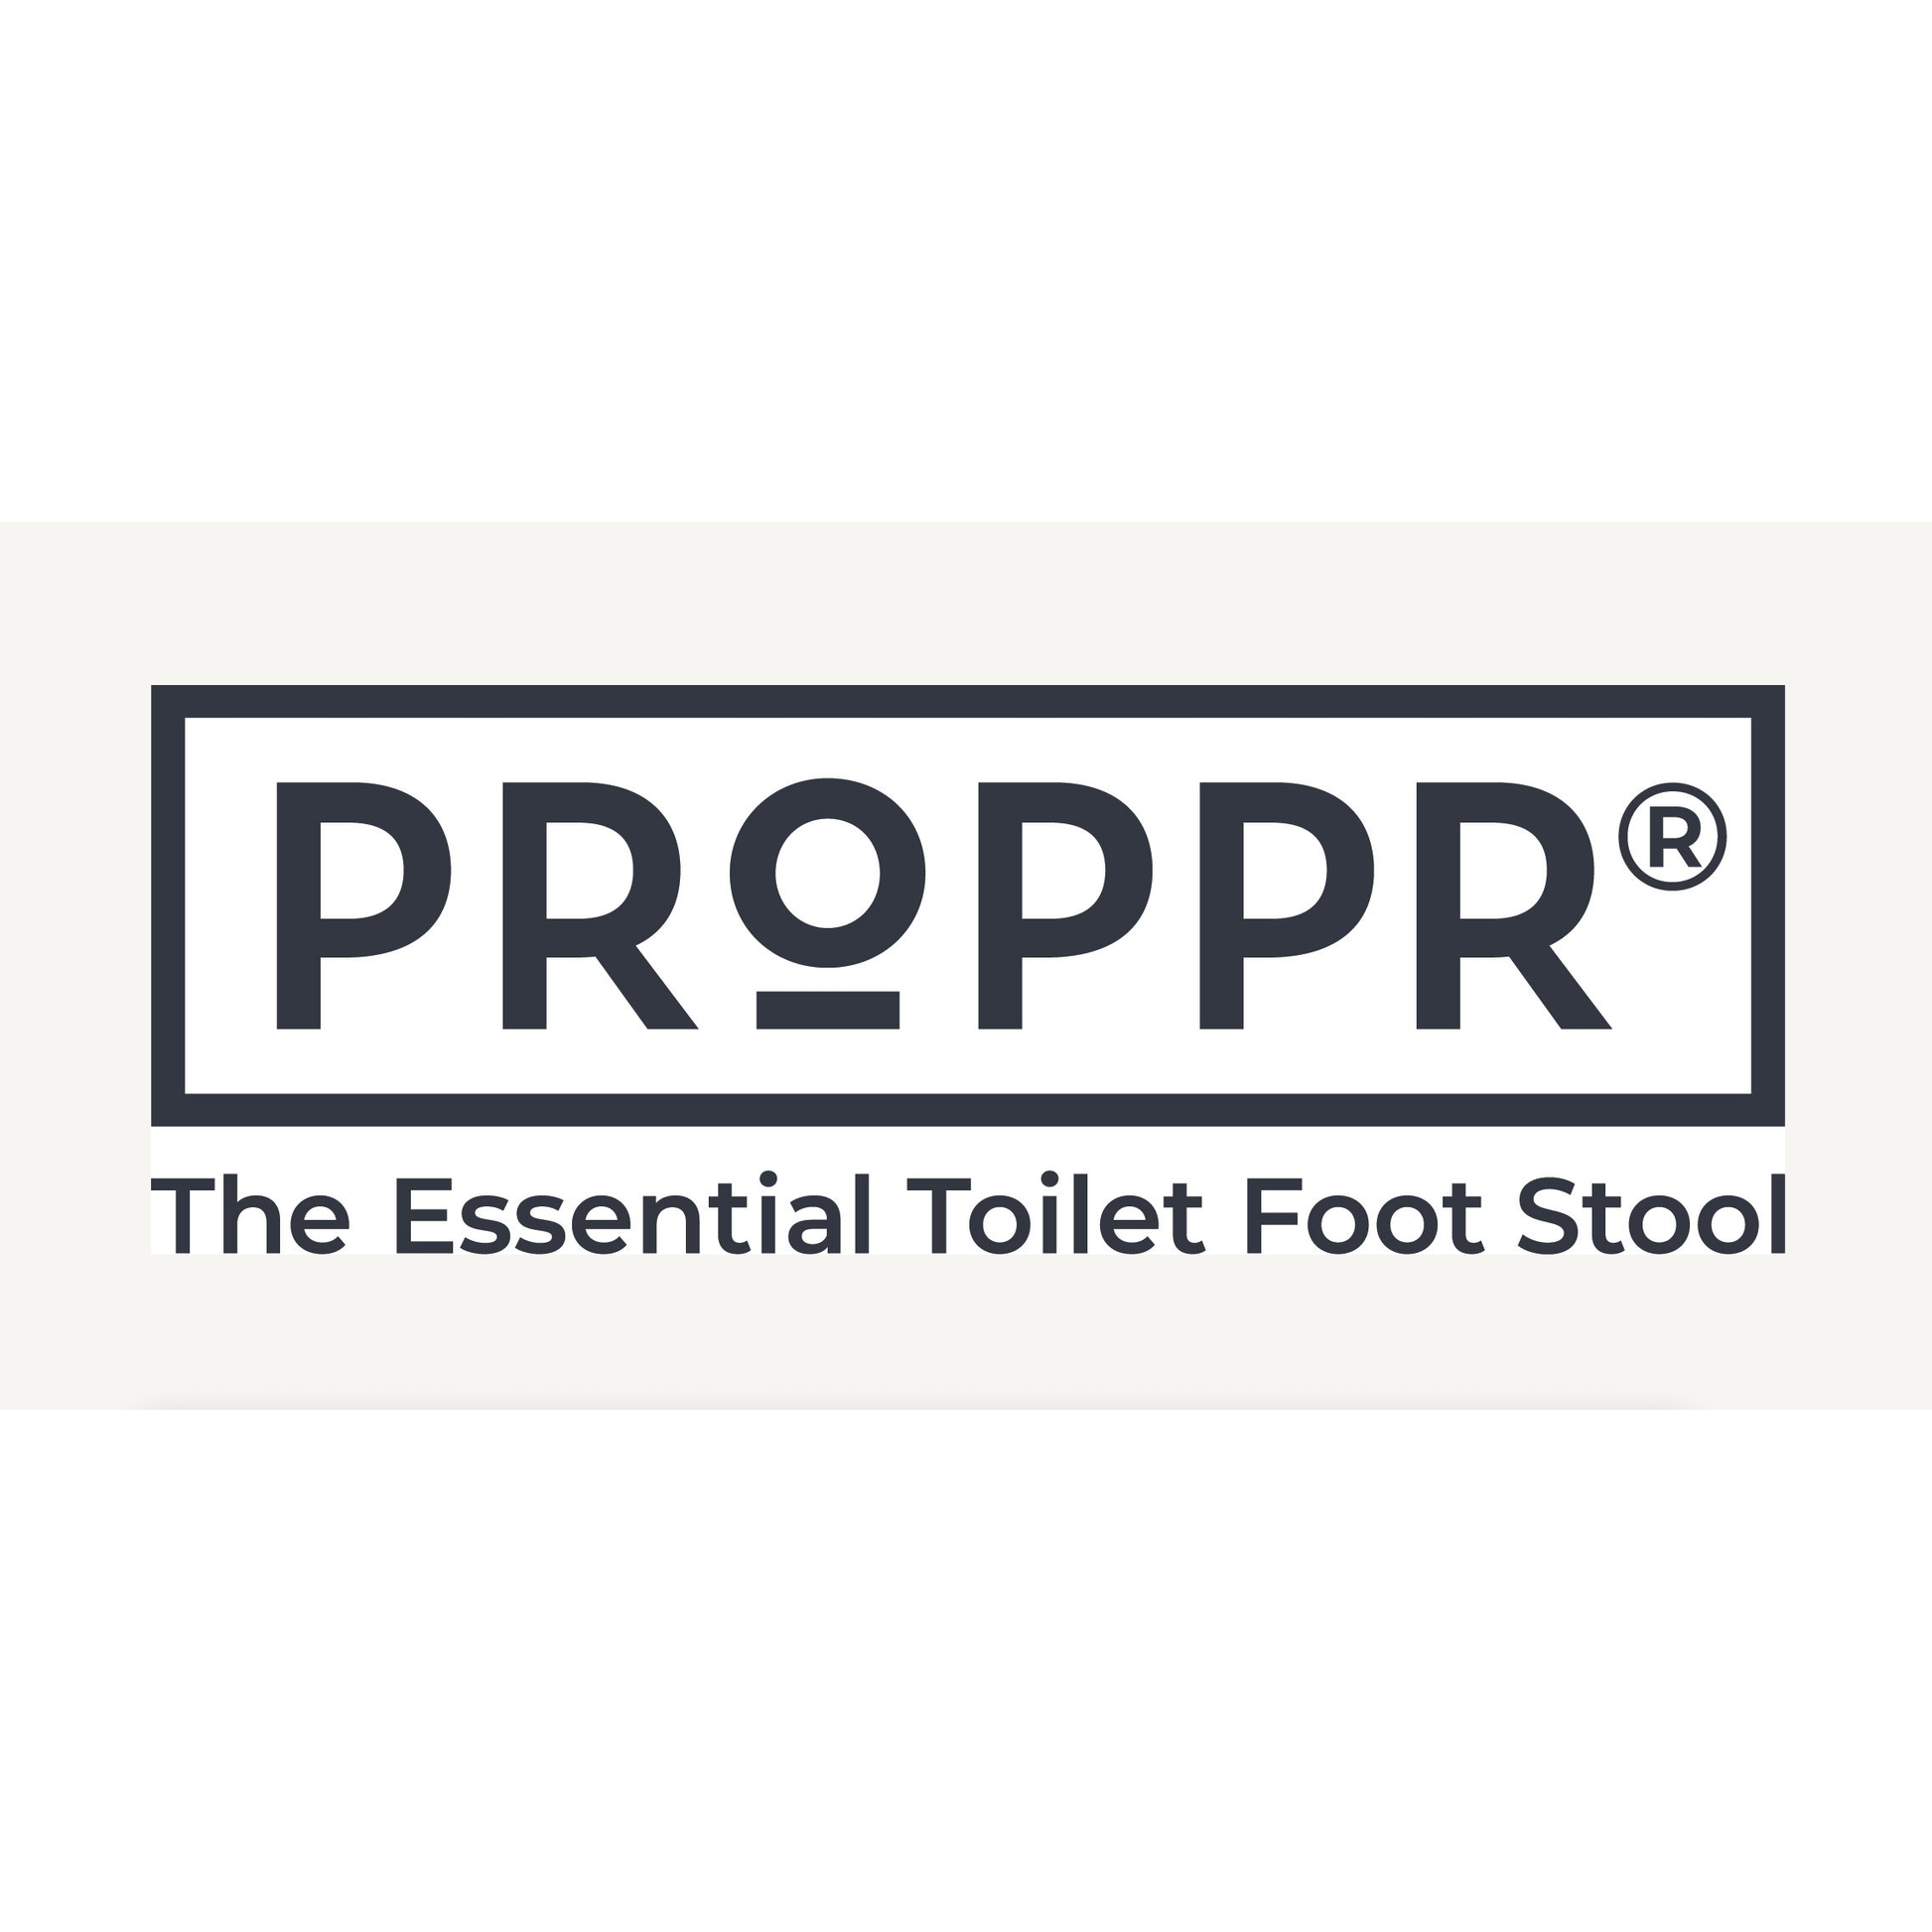 The PROPPR Acer - Nordic Toilet Foot Stool - proppr logo